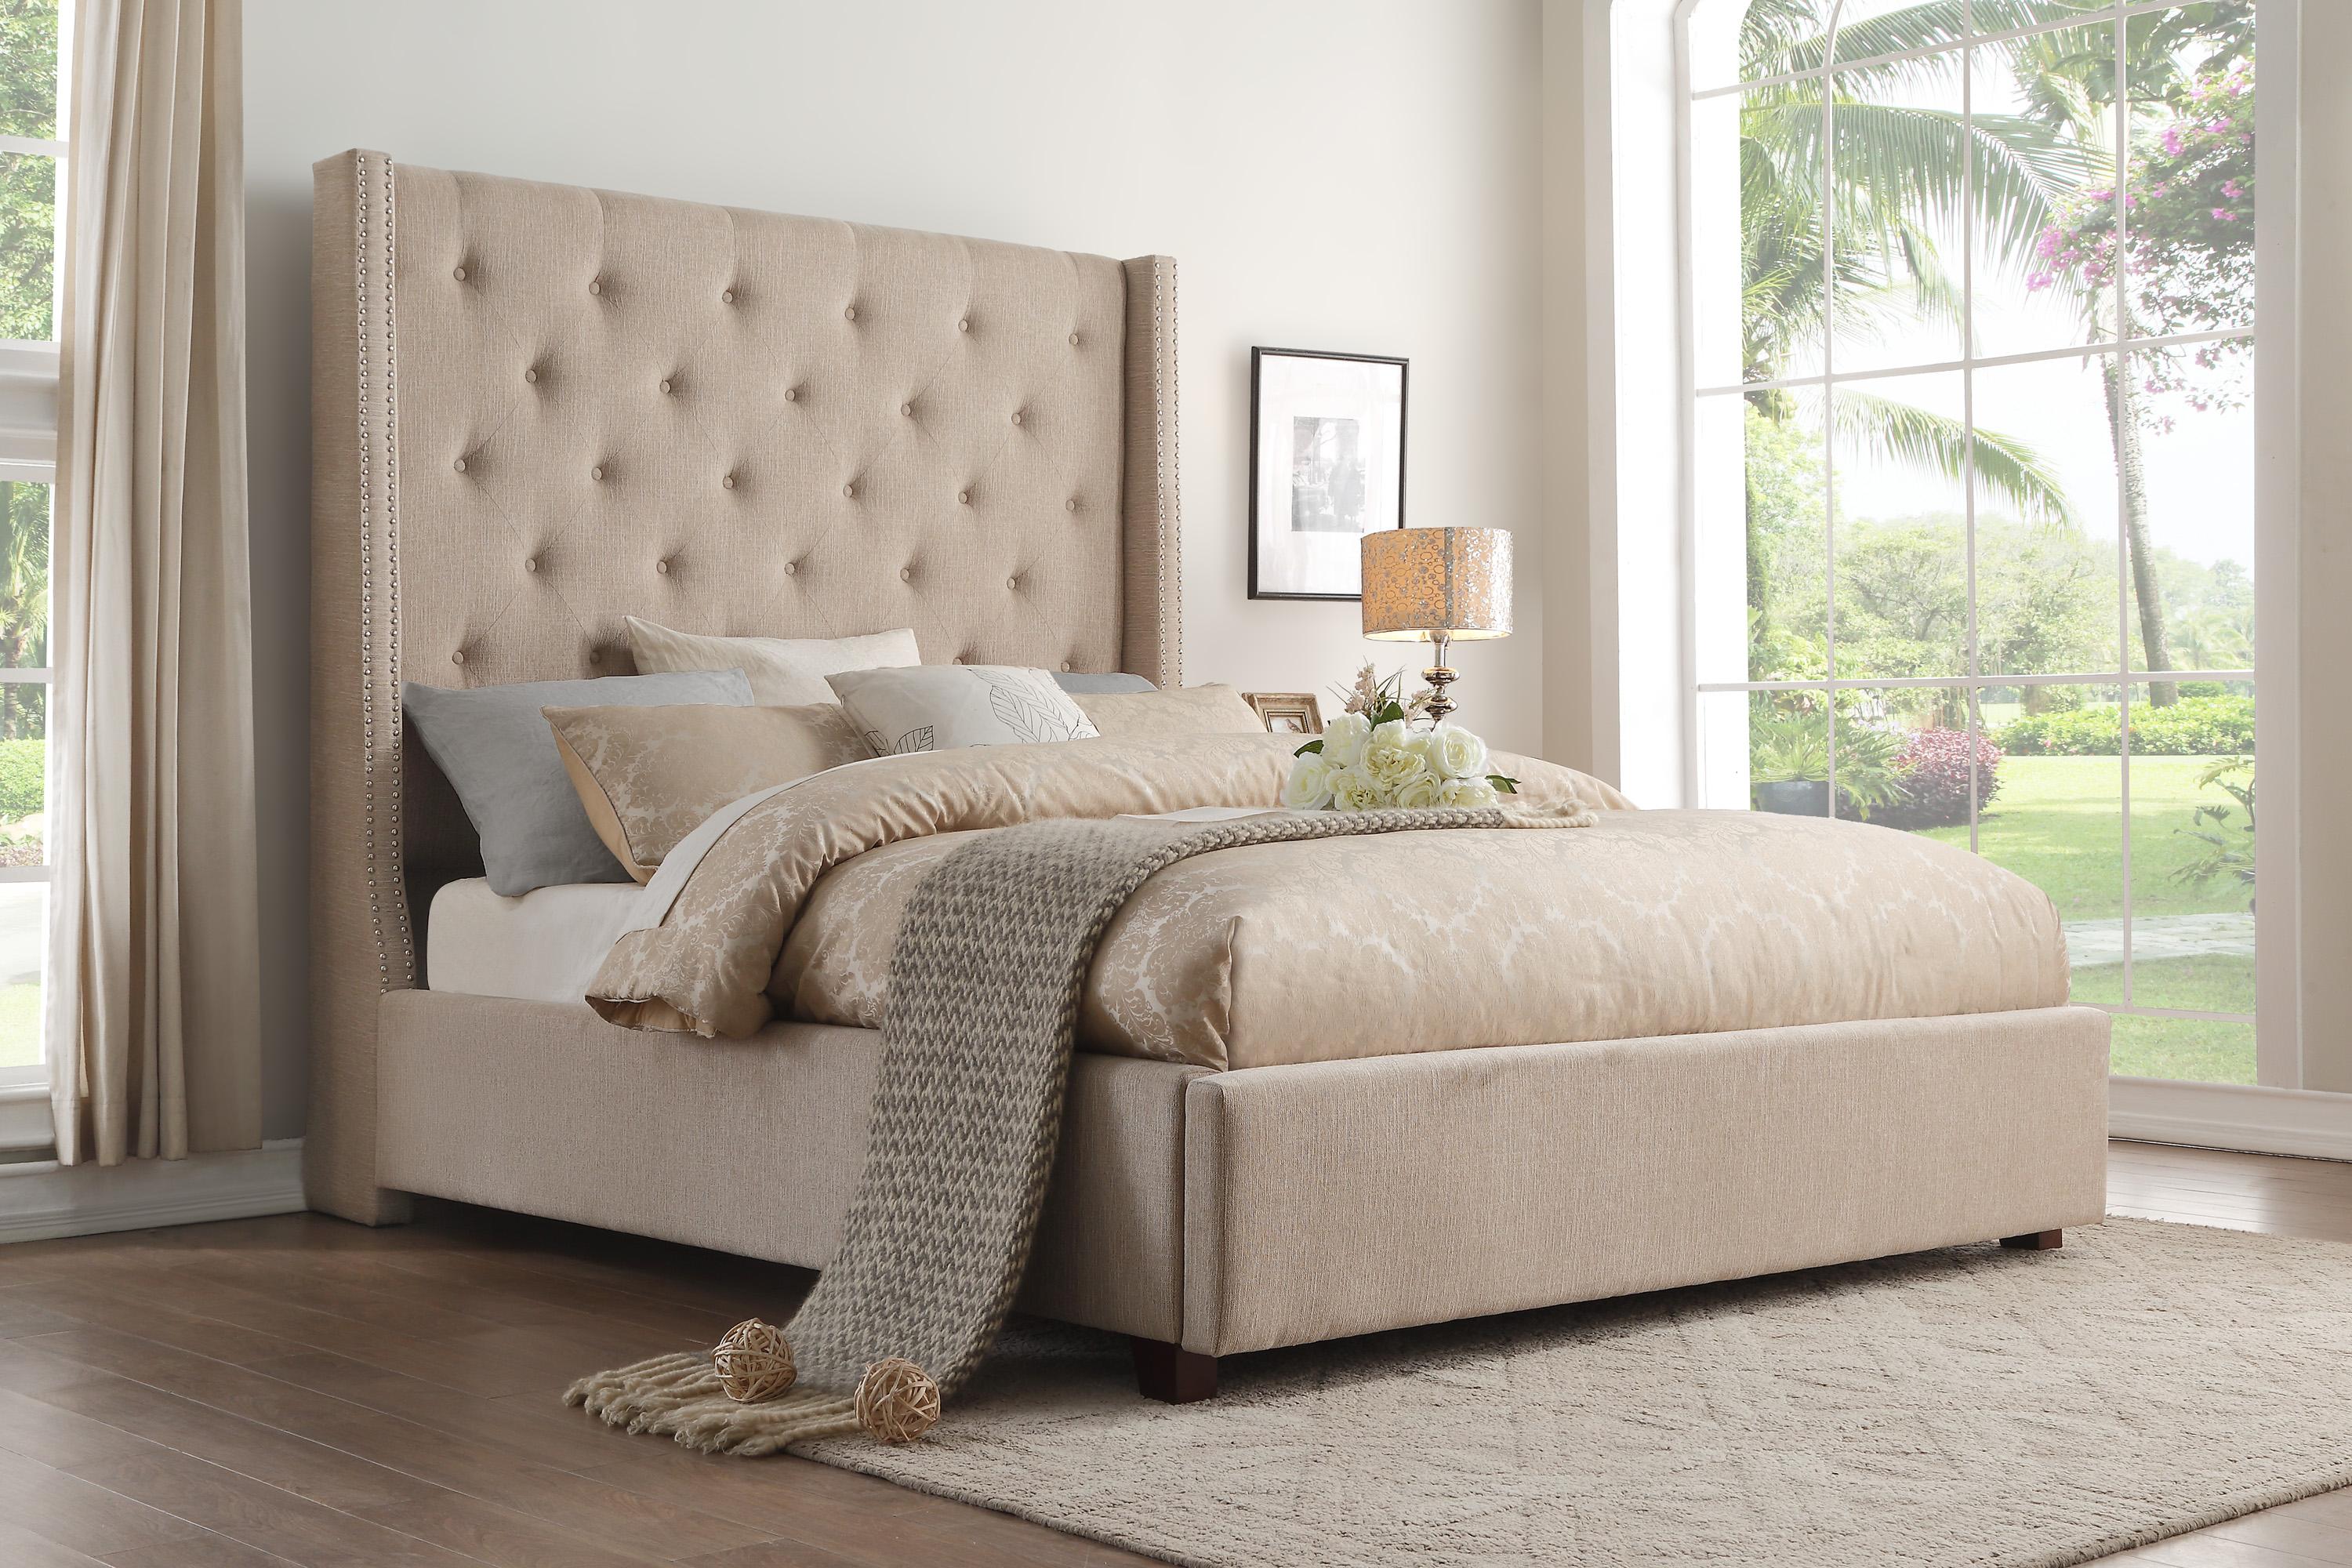 

    
Homelegance 5877BE-1DW* Fairborn Bed Beige 5877BE-1DW*
